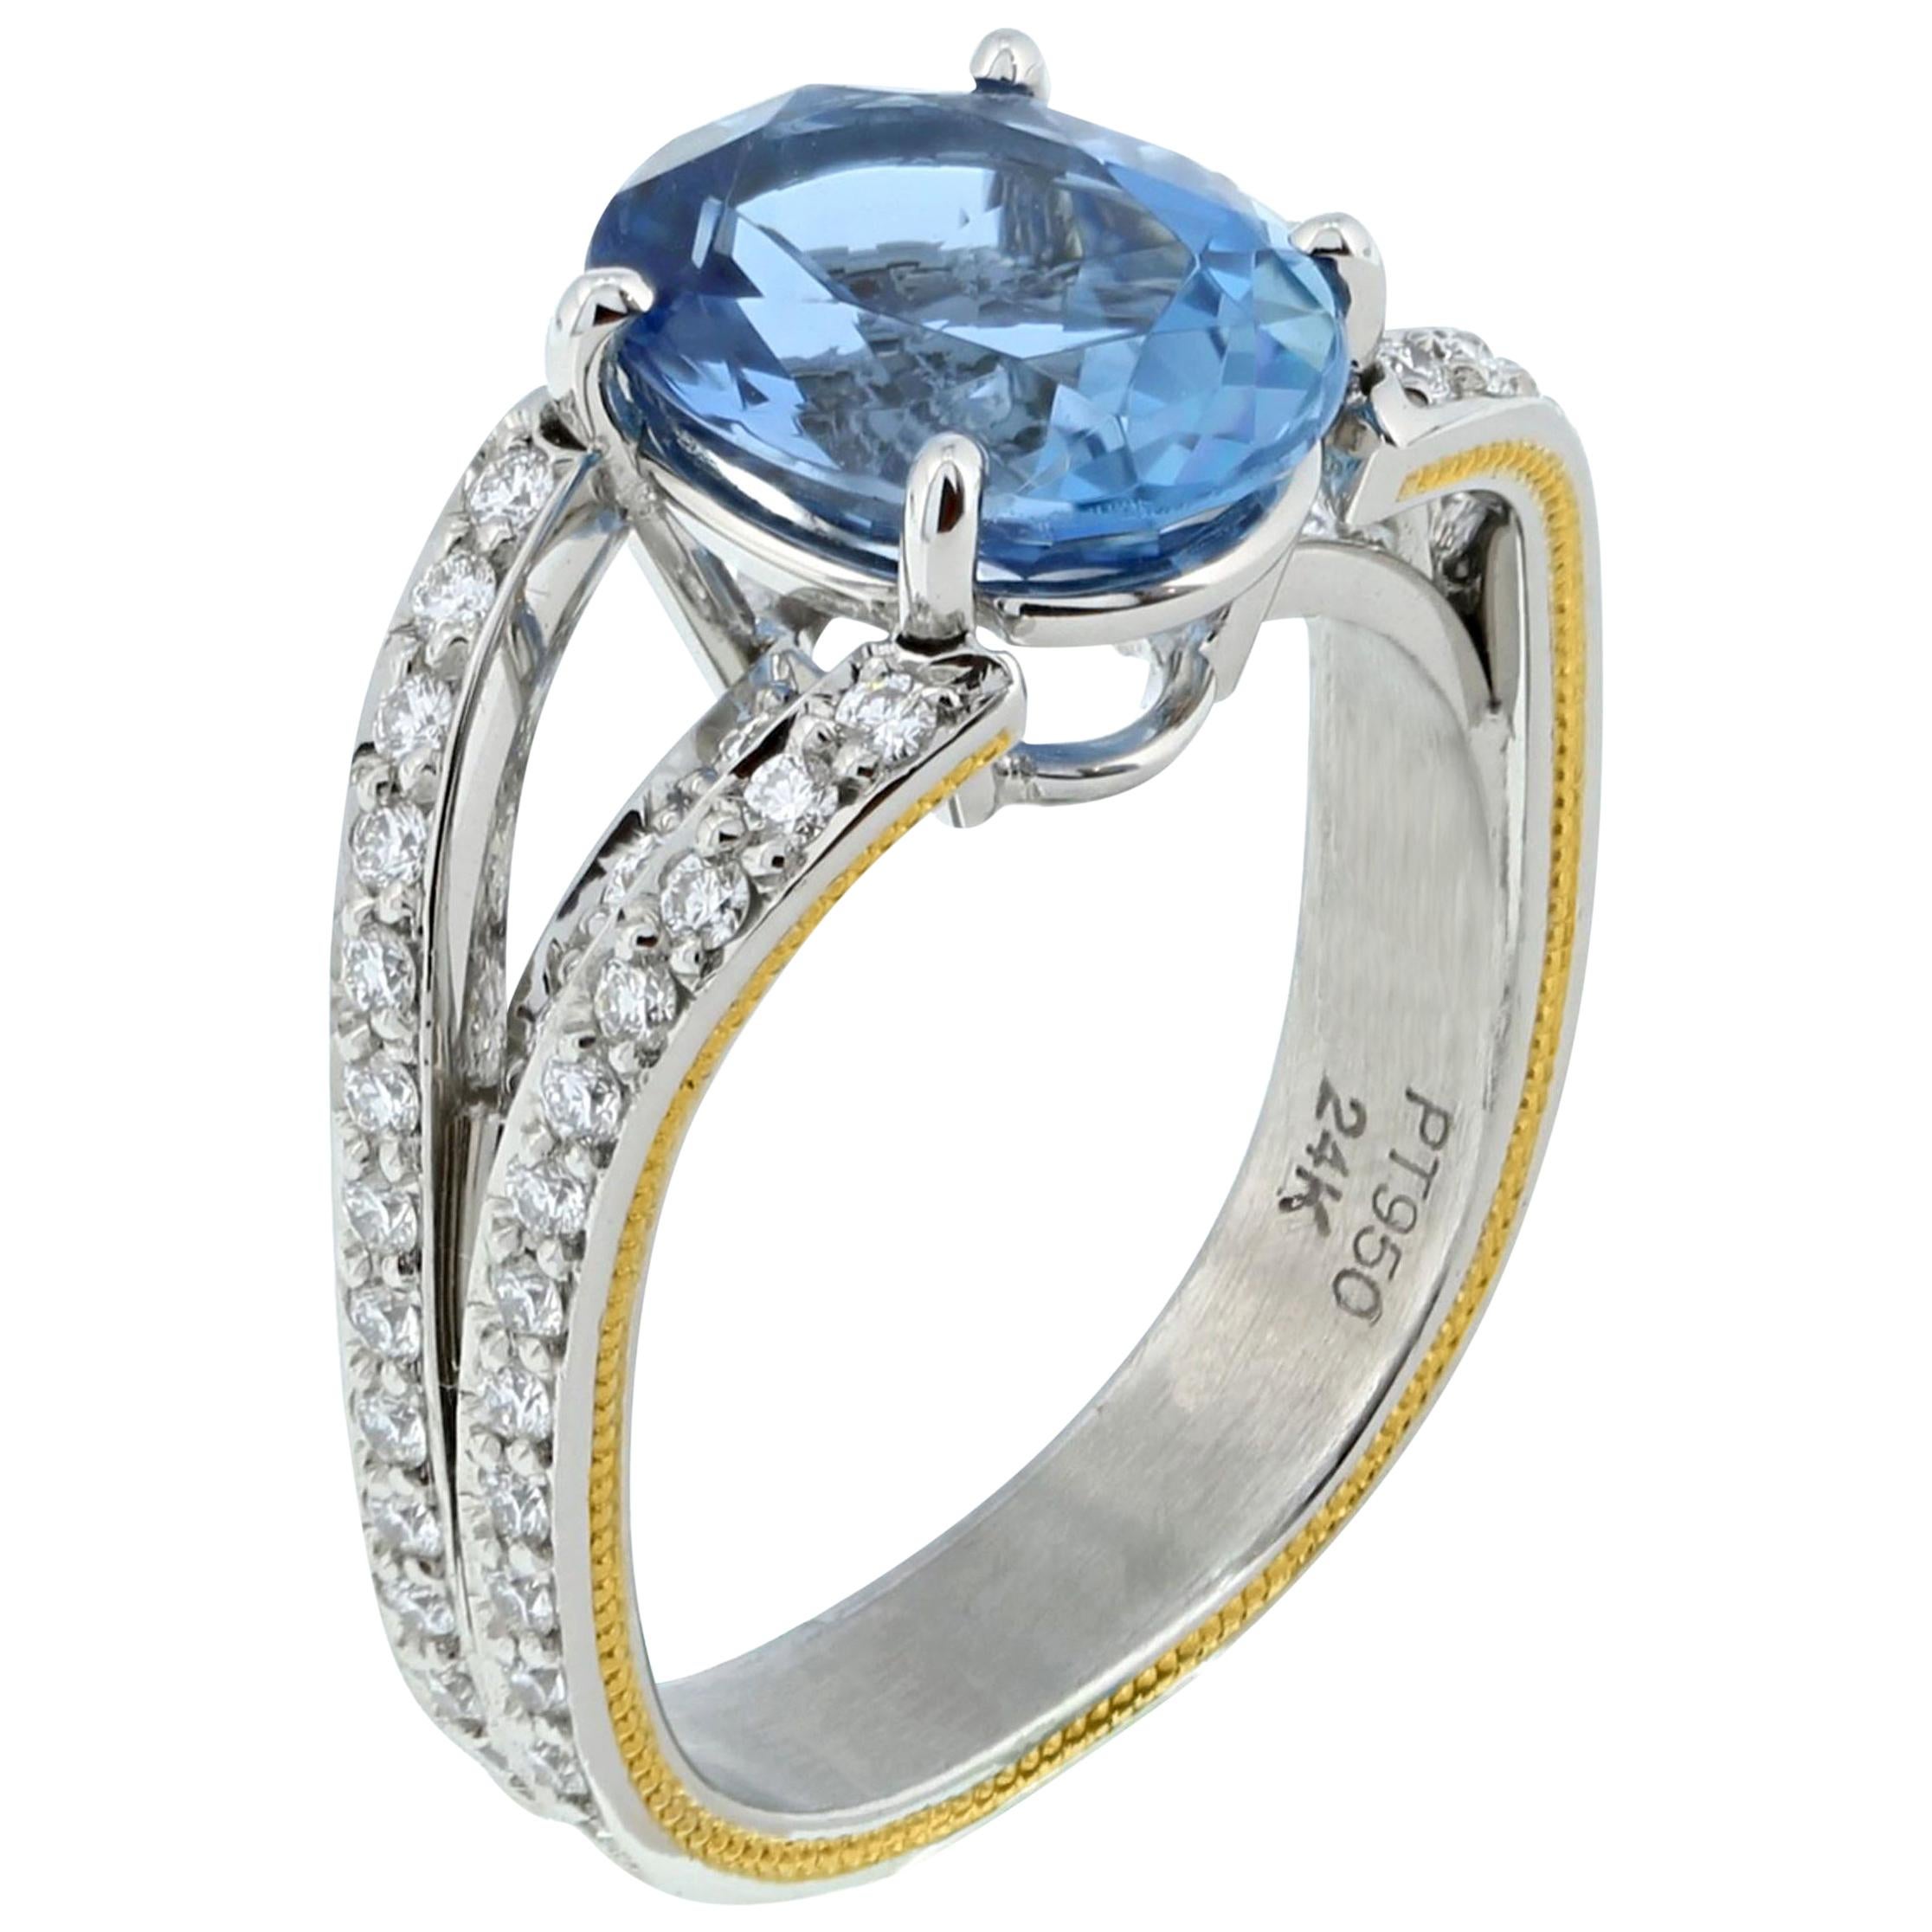 2.95 Carat Oval Aquamarine Ring in Platinum and 24 Karat Gold by Zoltan David For Sale